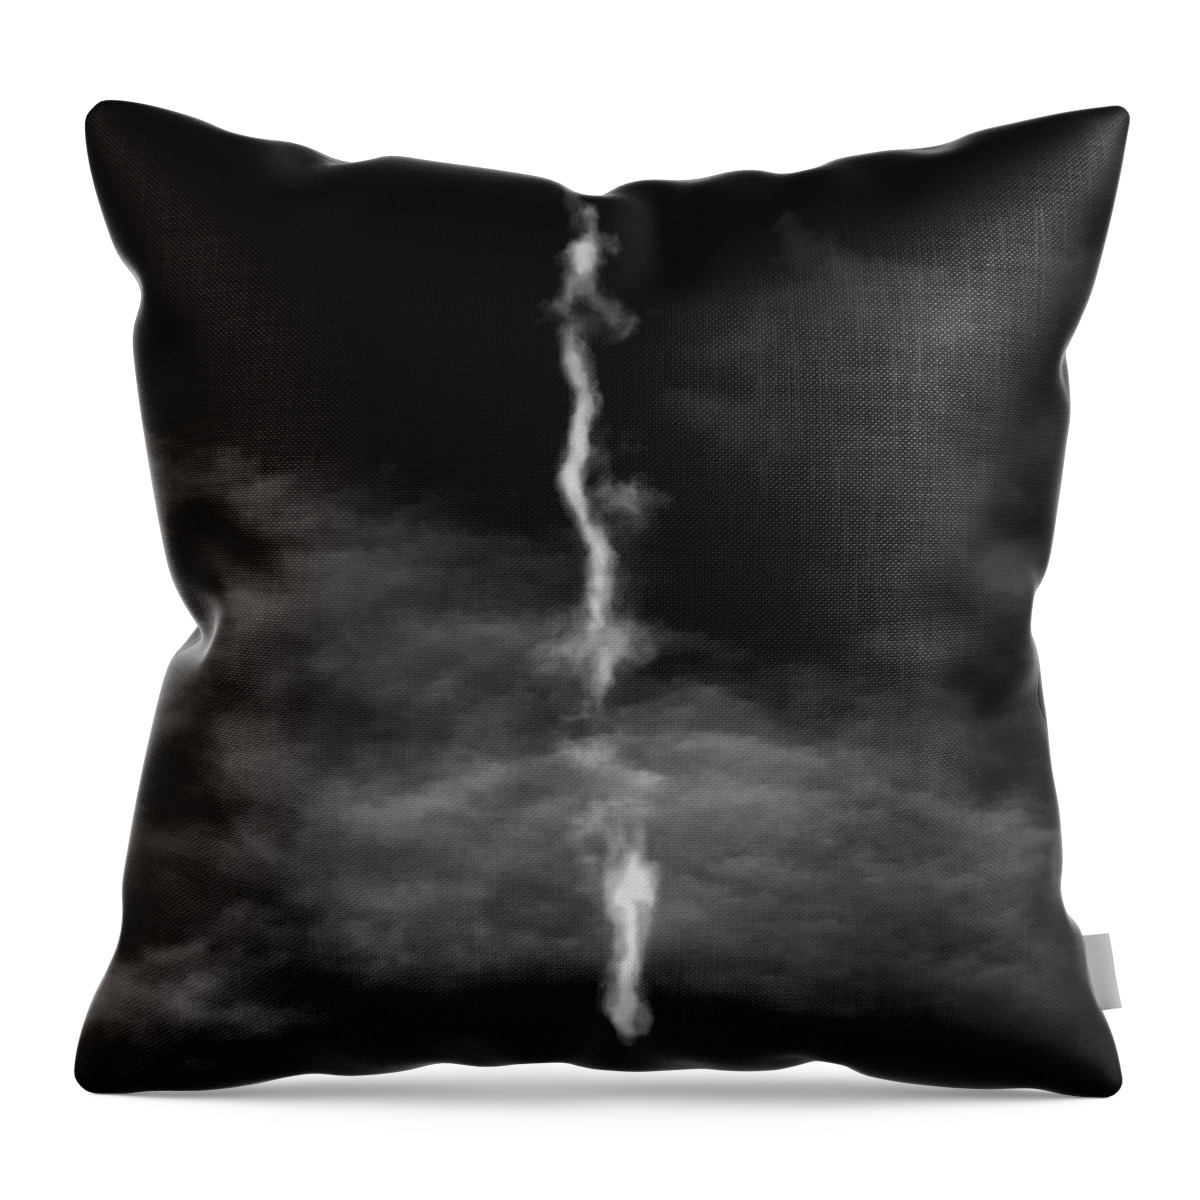 Exclamation Point Throw Pillow featuring the photograph Exclamation by Dominic Piperata